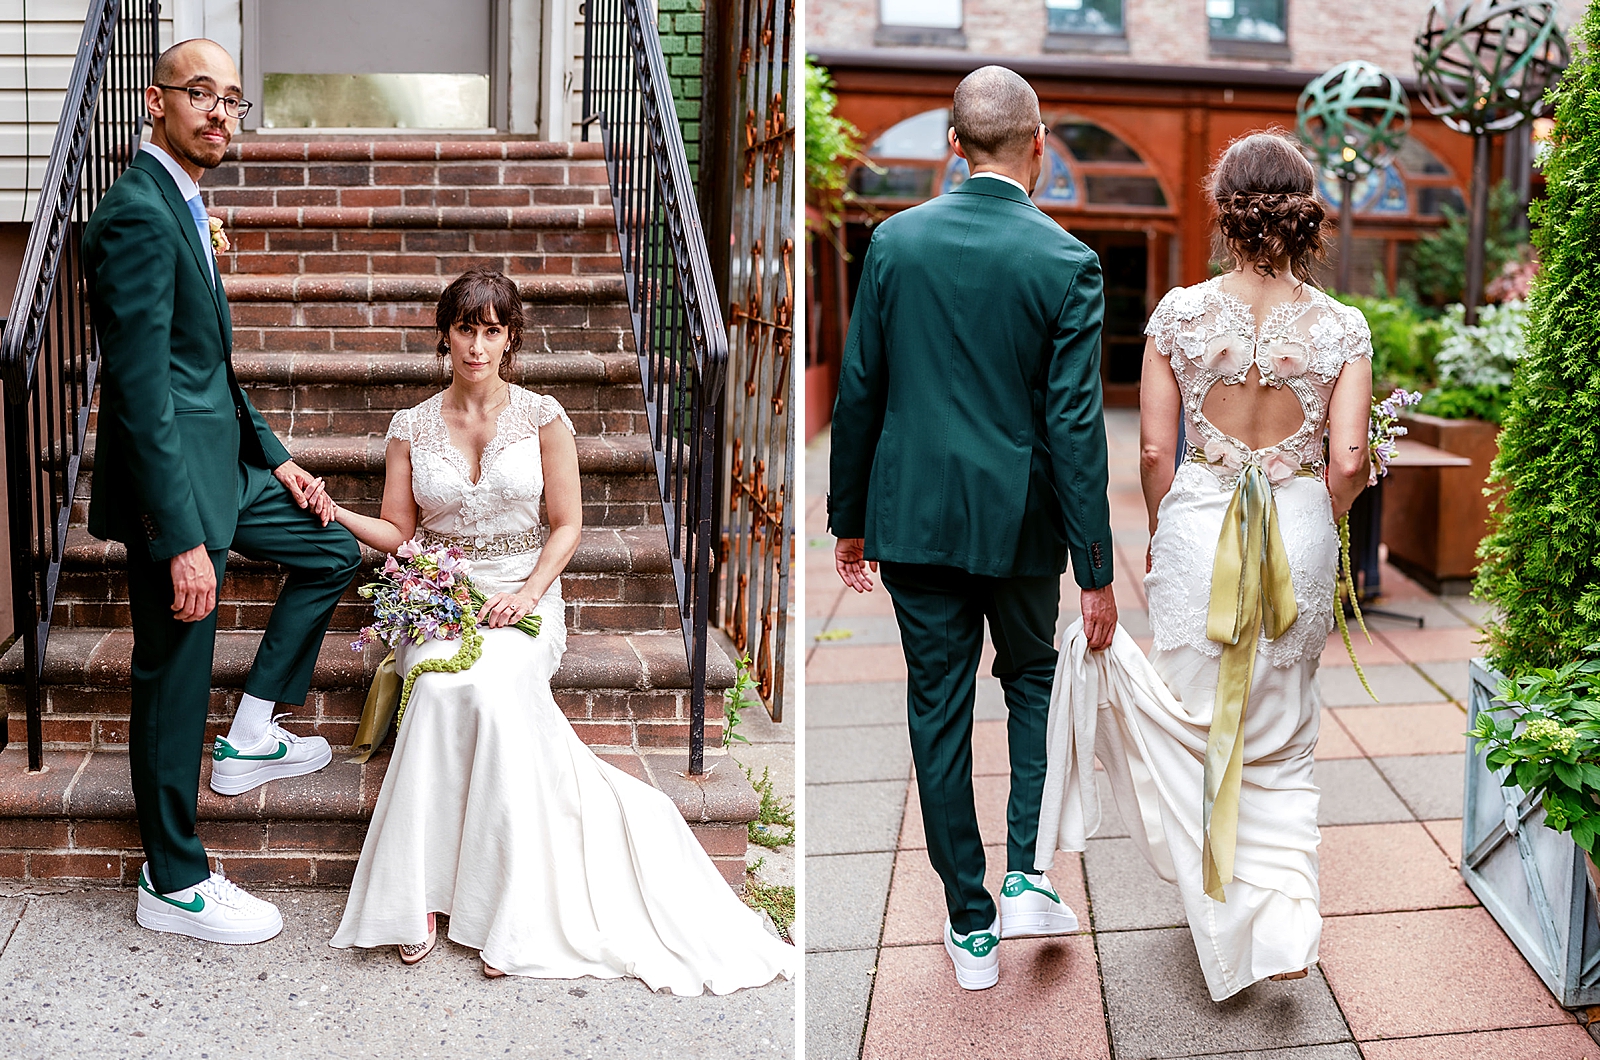 Left photo: Full body shot of the bride and groom holding hands as they pose on a stoop. 
Right photo: Back shot of the groom holding the bride's train as they walk. 